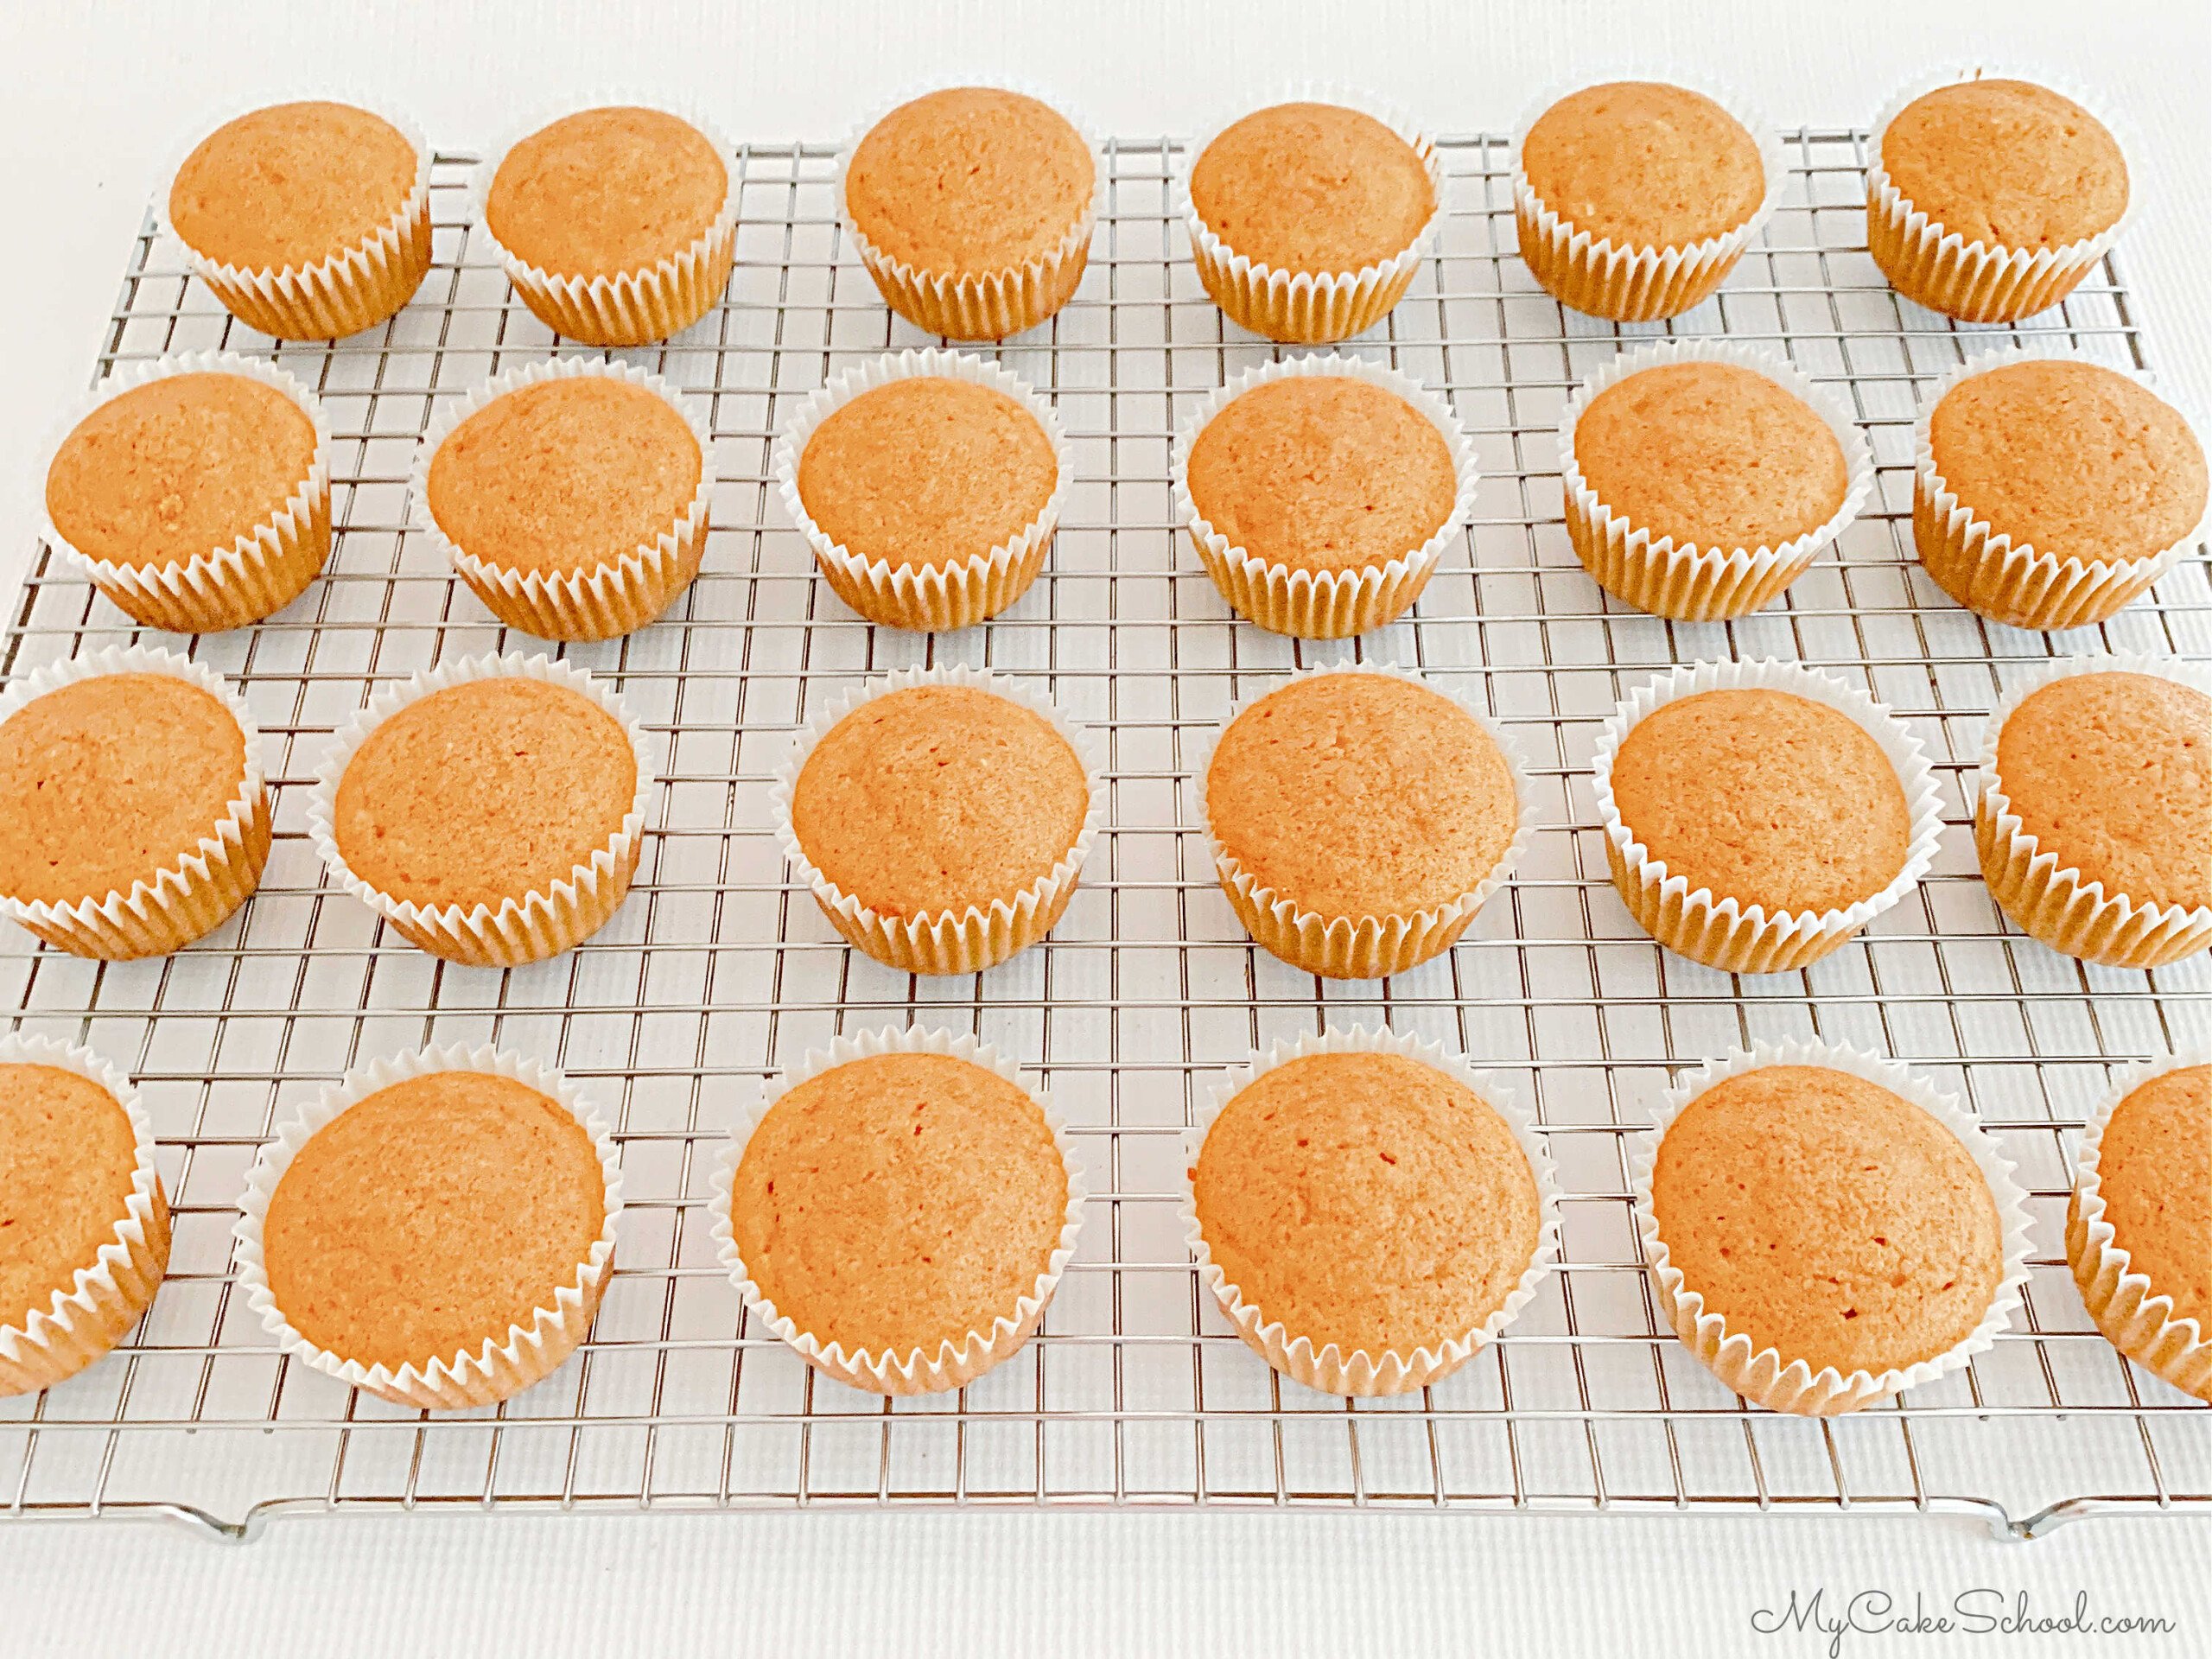 Pumpkin Cupcakes cooling on a wire rack.